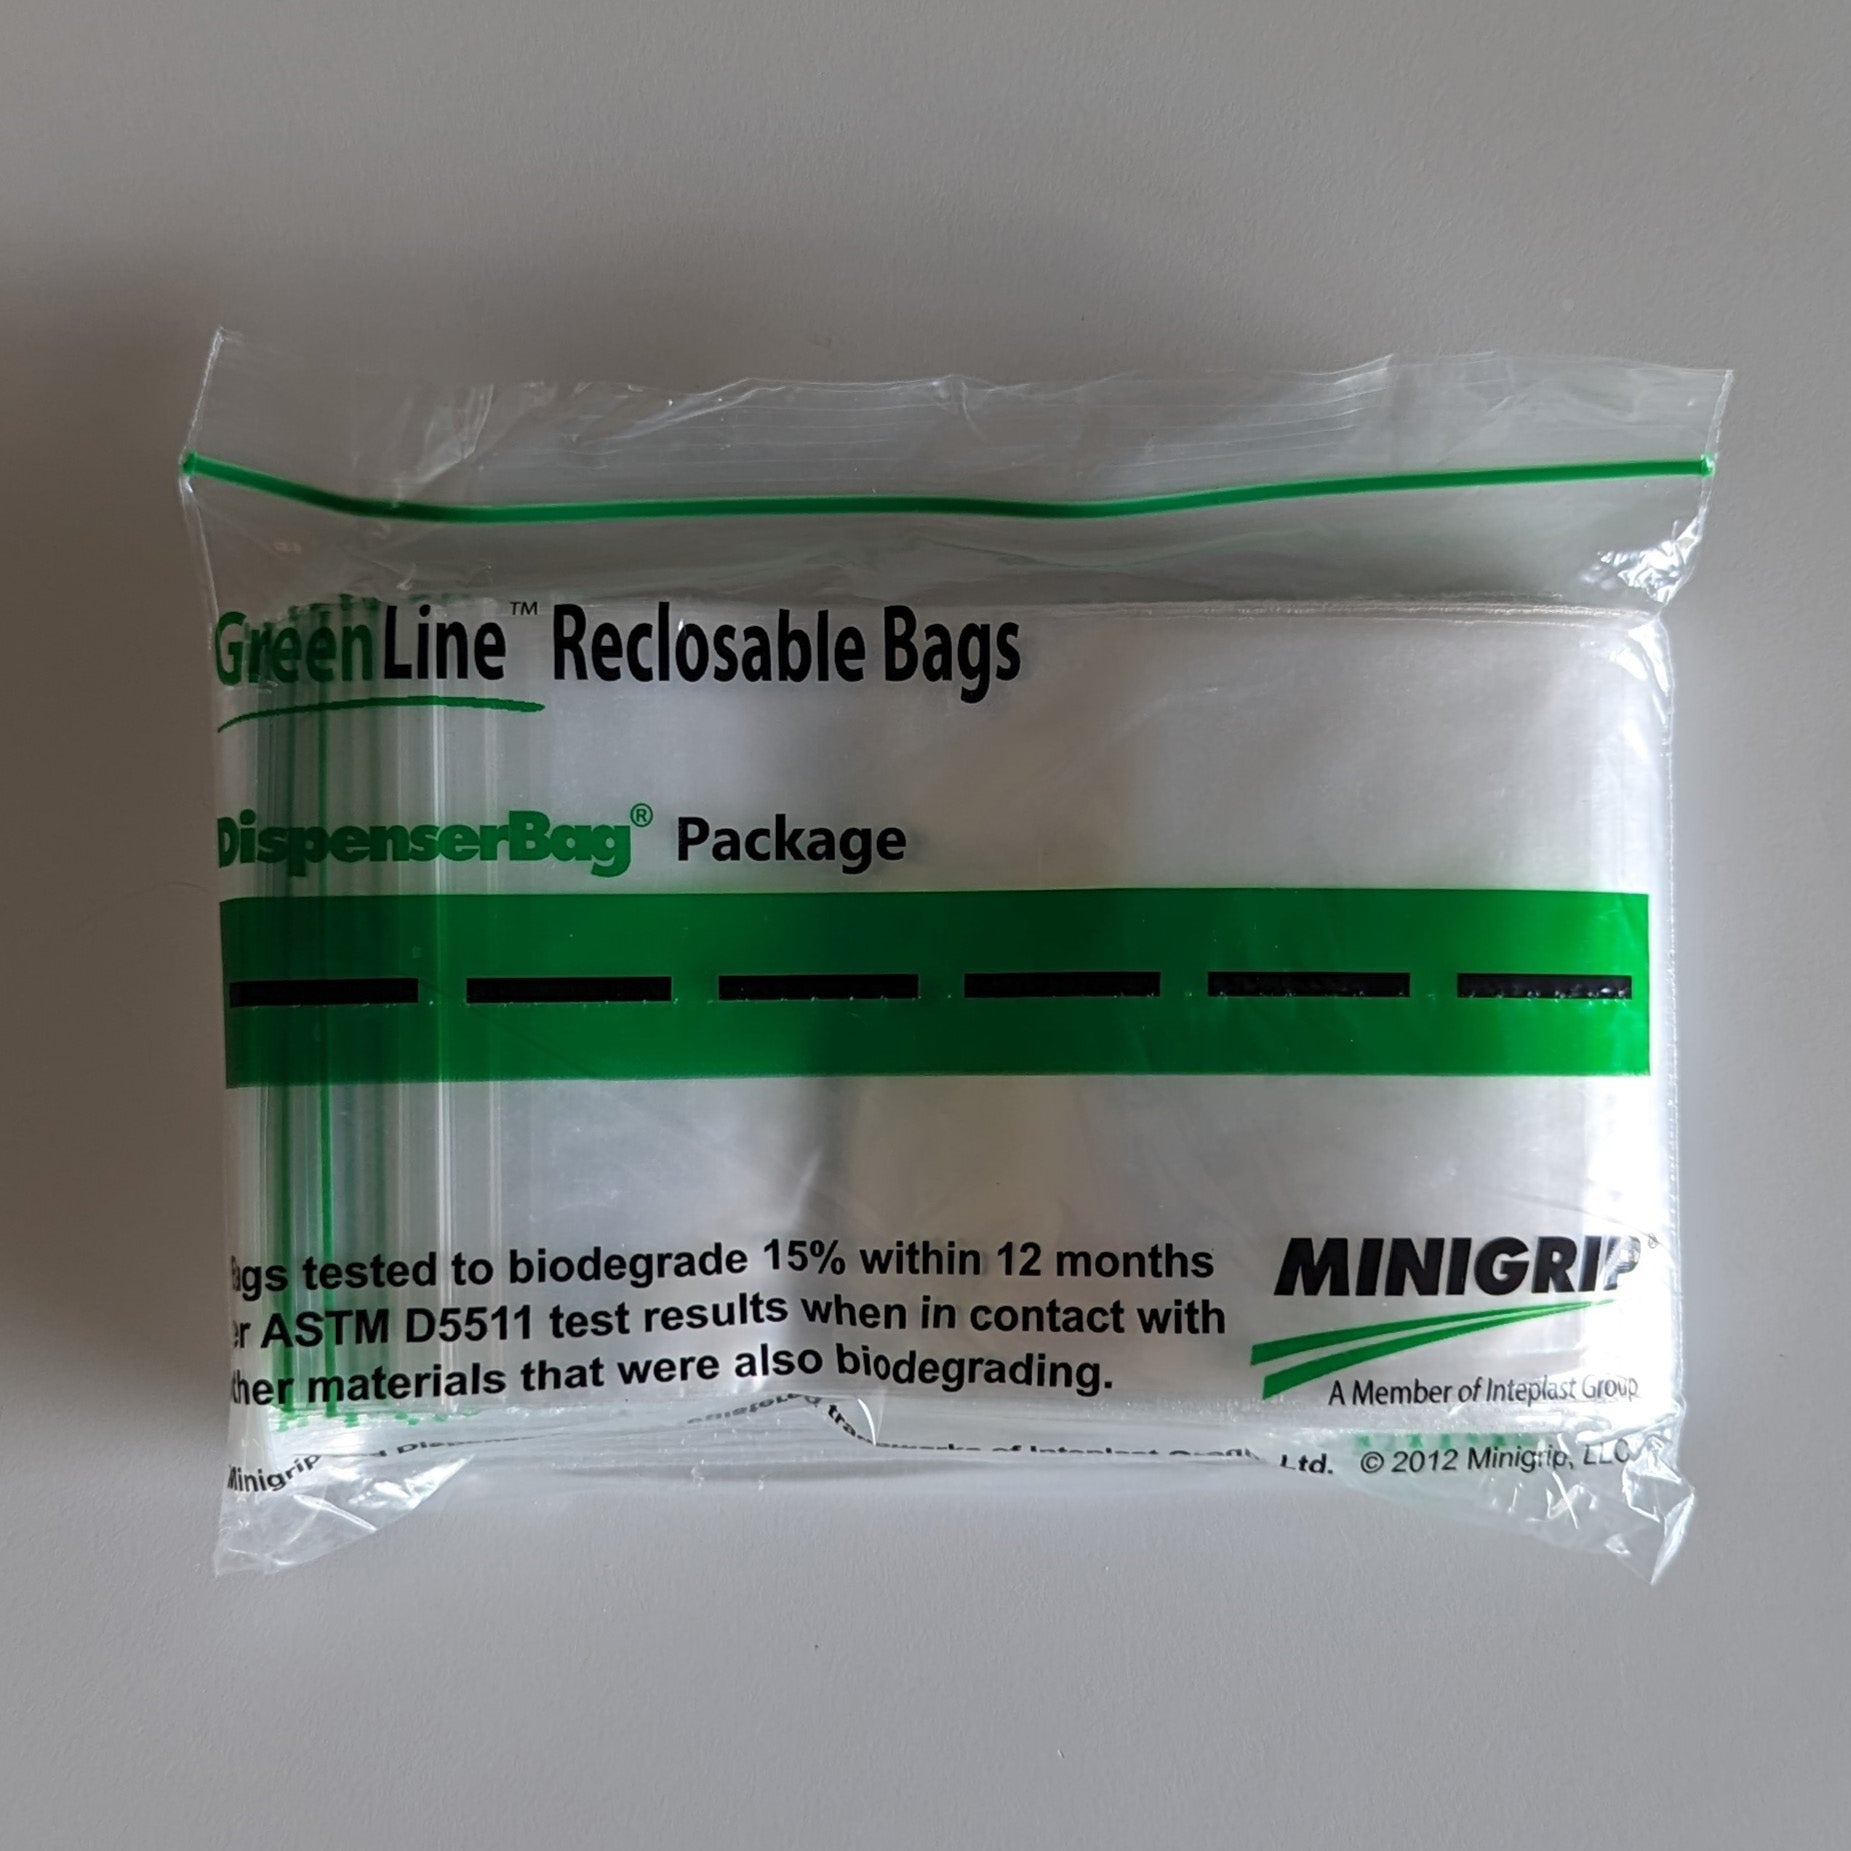 100 Poly Bag Zipper Resealable Plastic Shipping Bags 6 x 9